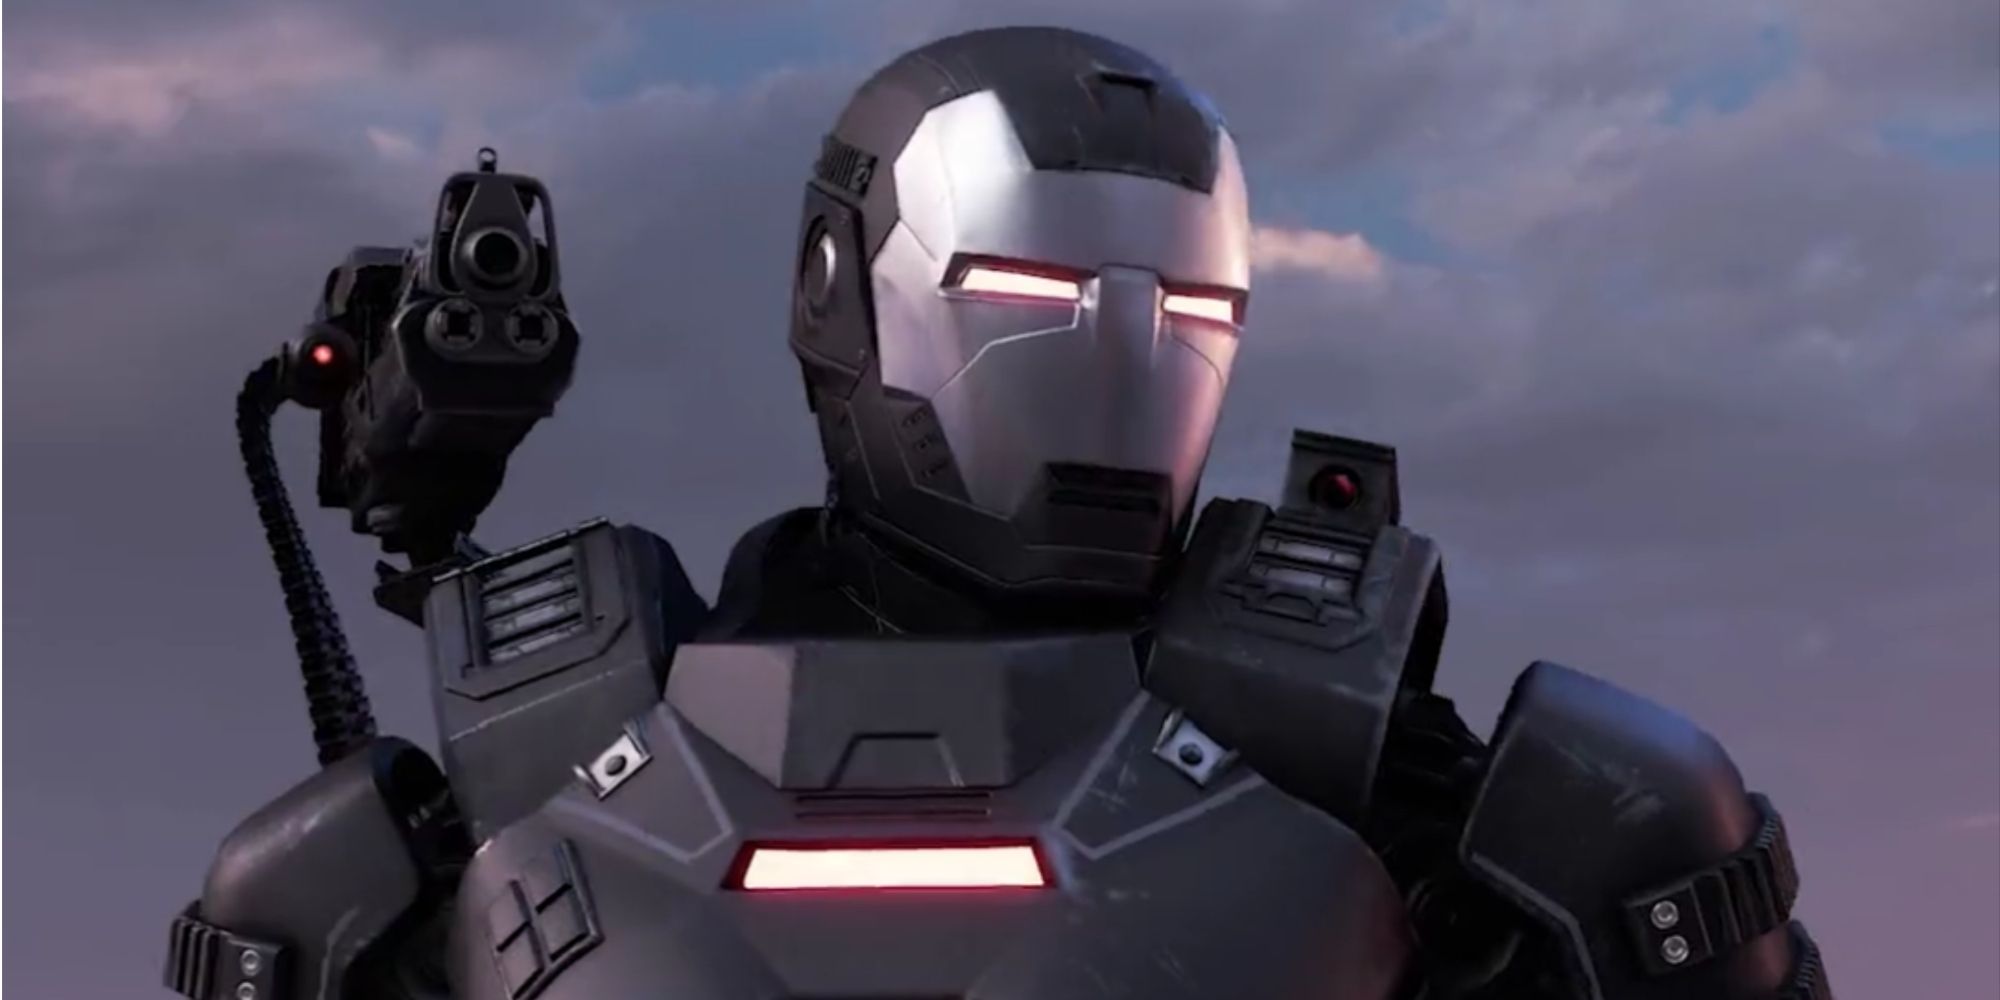 Marvel’s Avengers Players To Receive War Machine Iron Man Skin As A Thank You